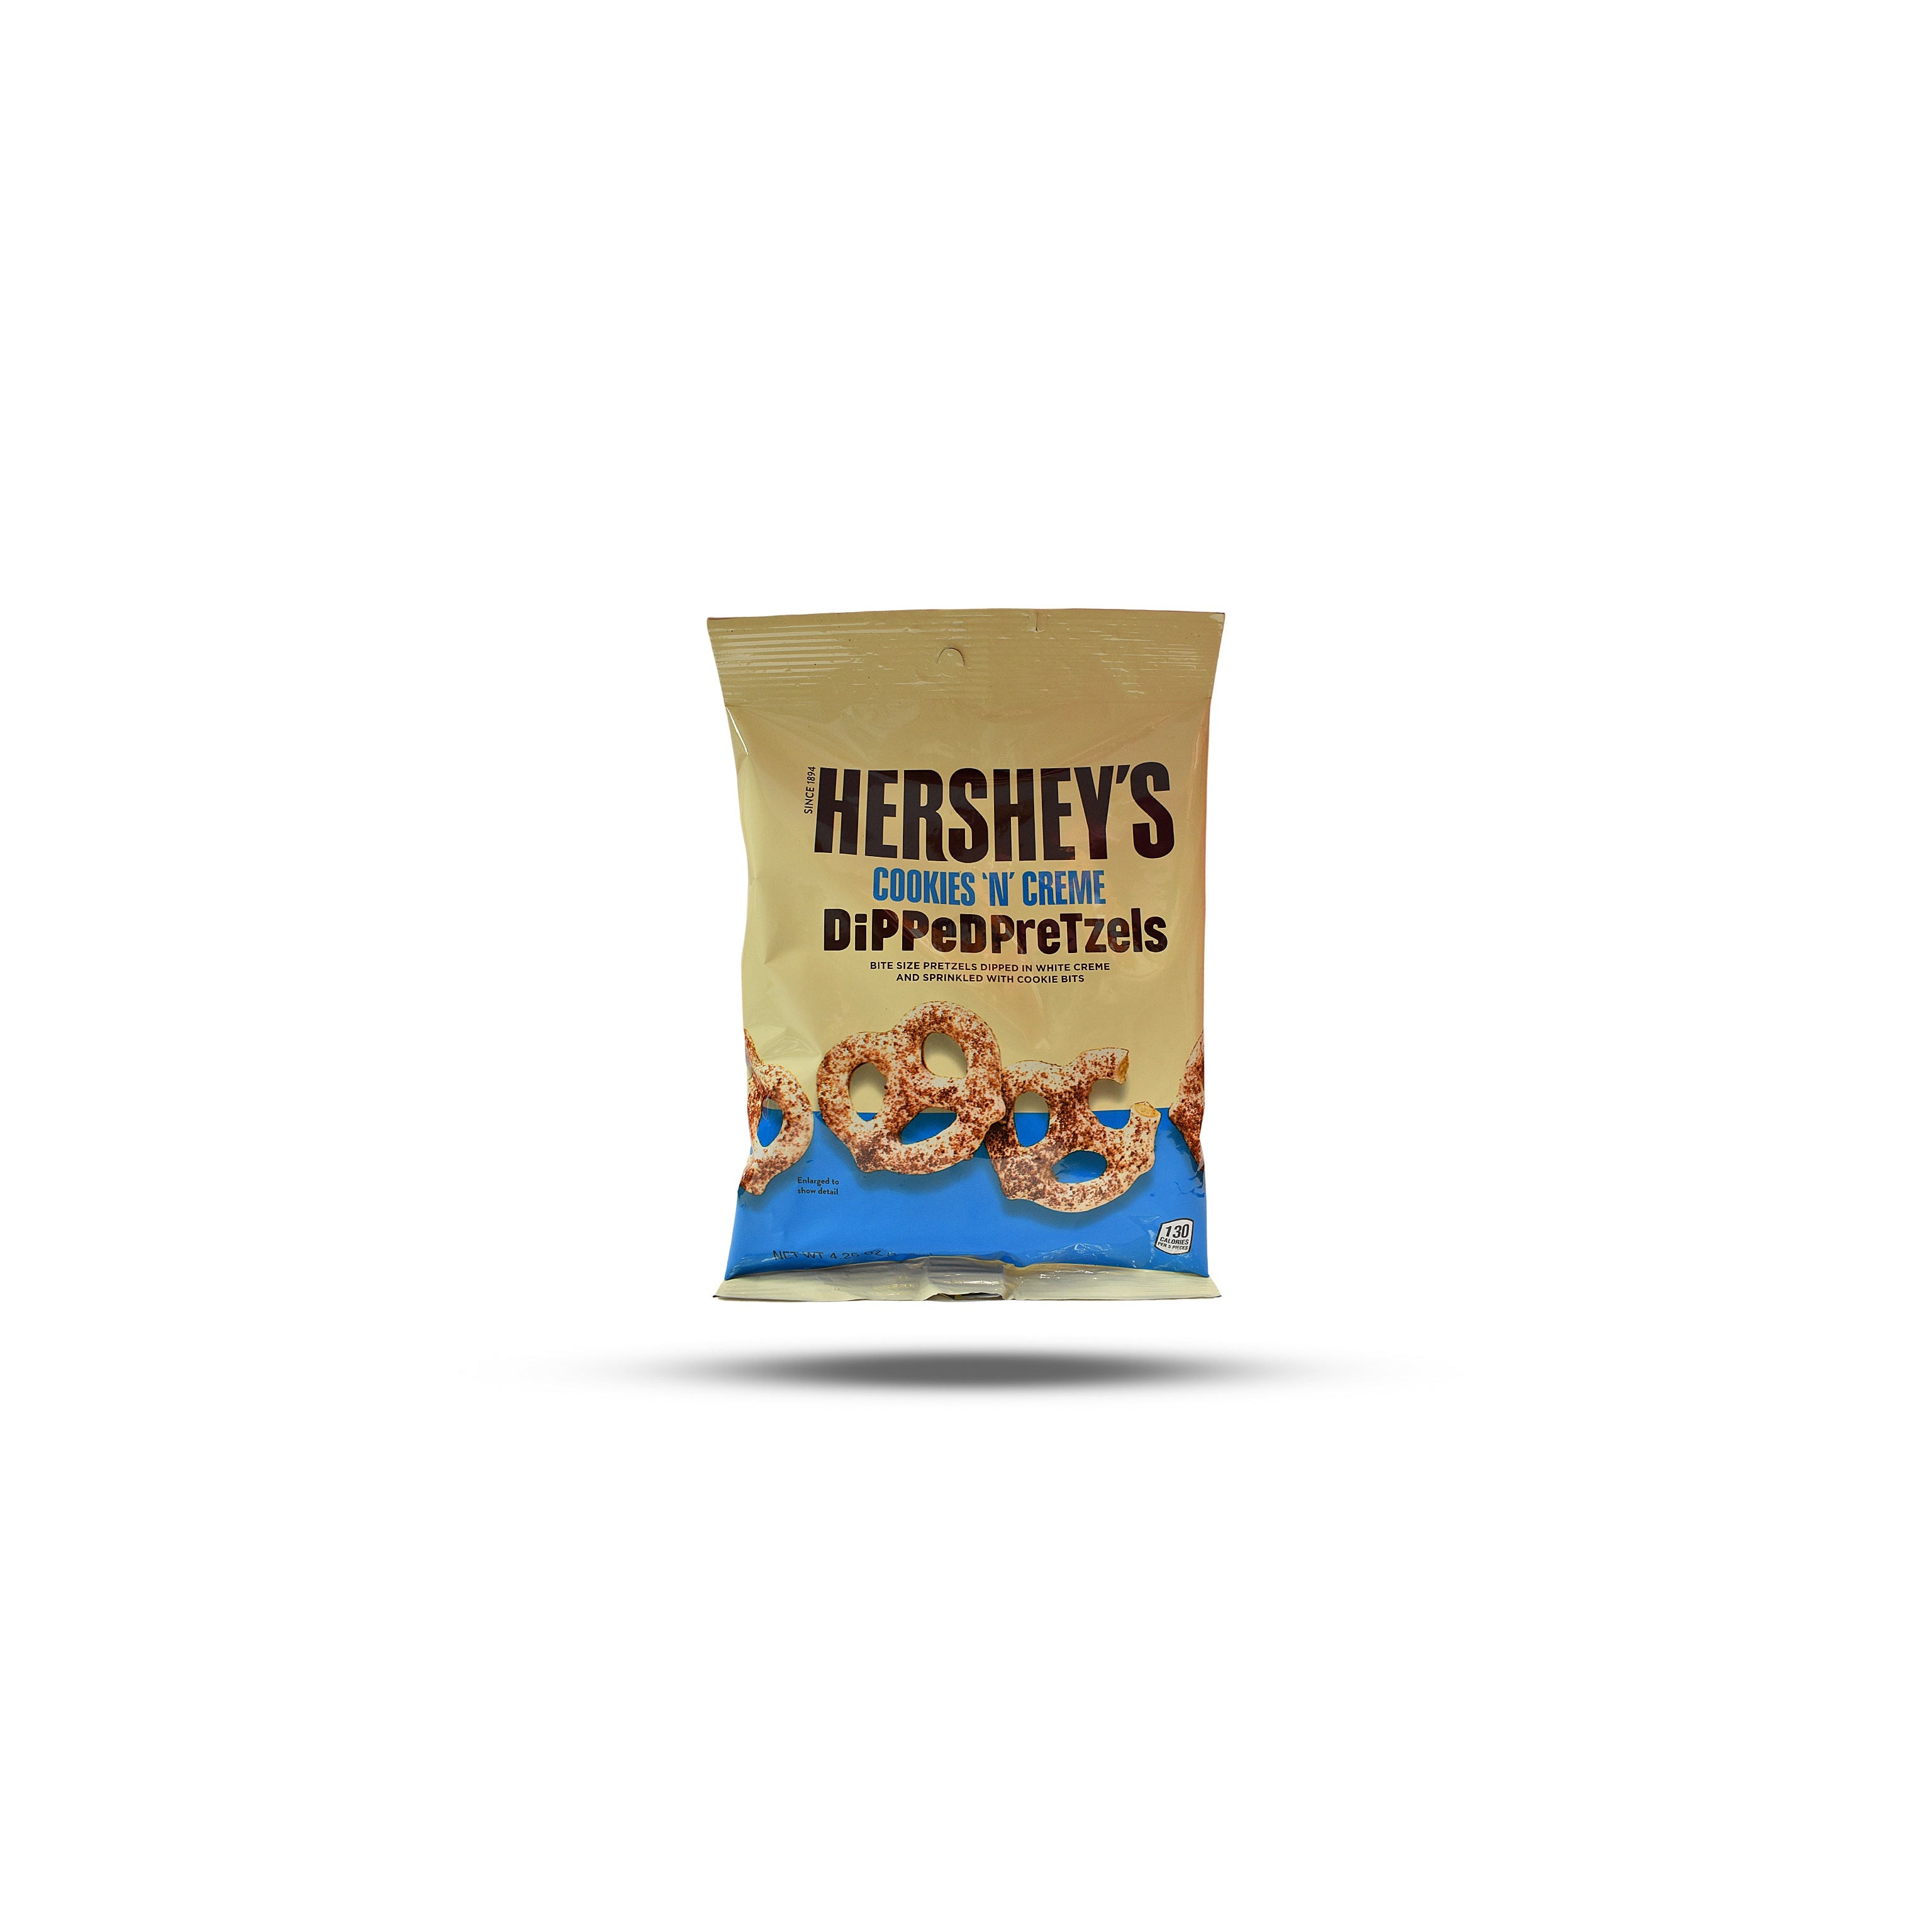 Hershey´s Cookies N Creme Dipped Pretzels 120g-The Hershey Company-SNACK SHOP AUSTRIA